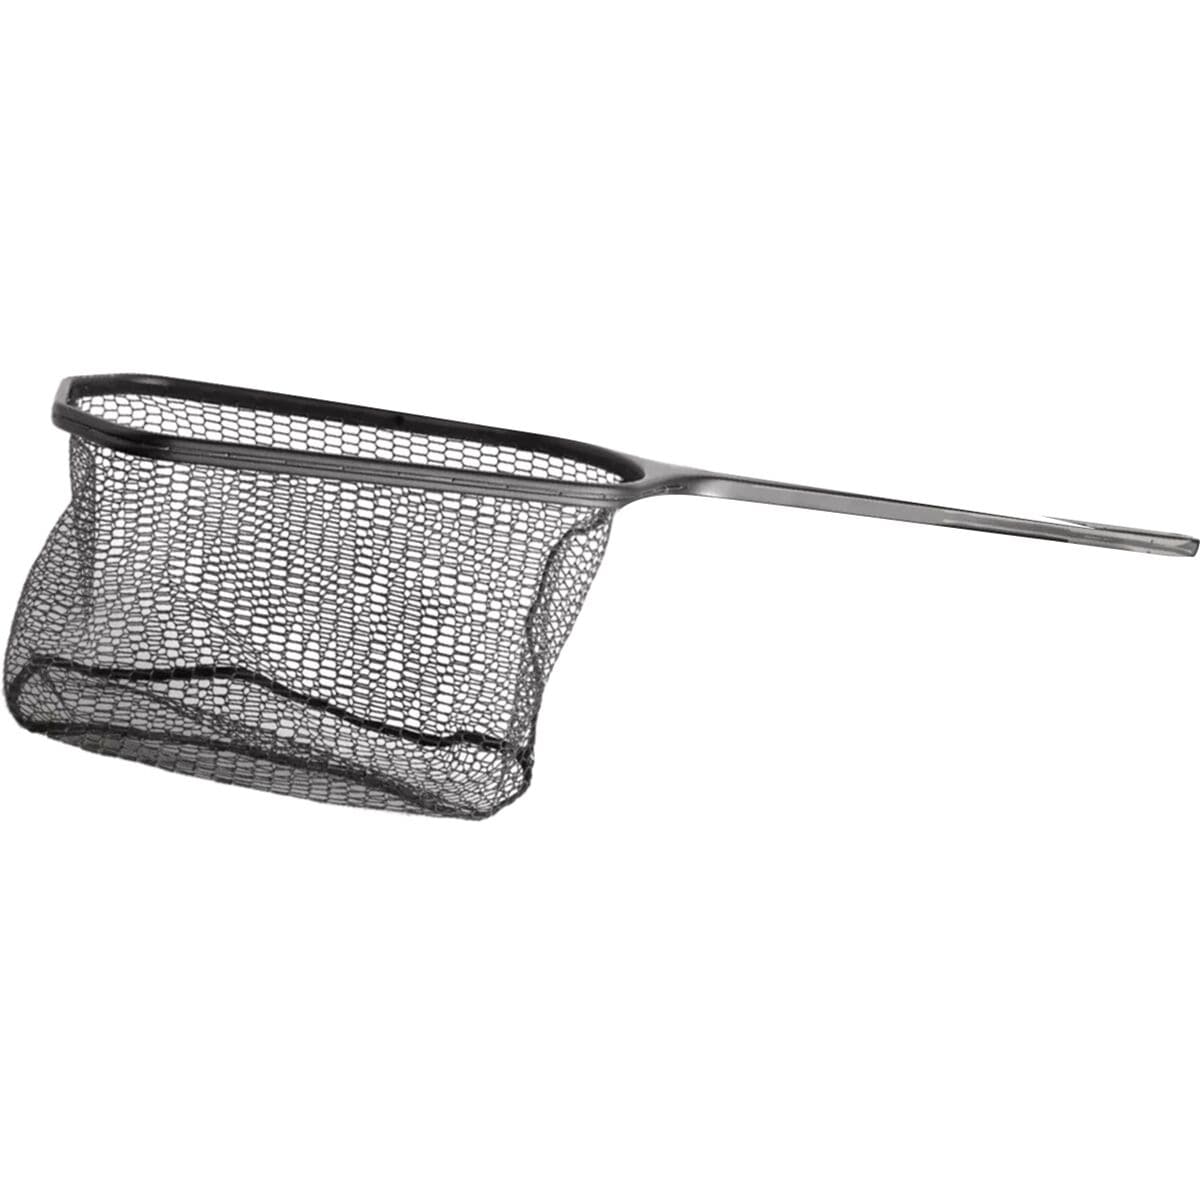 Orvis Wide Mouth Guide Net - Fishing